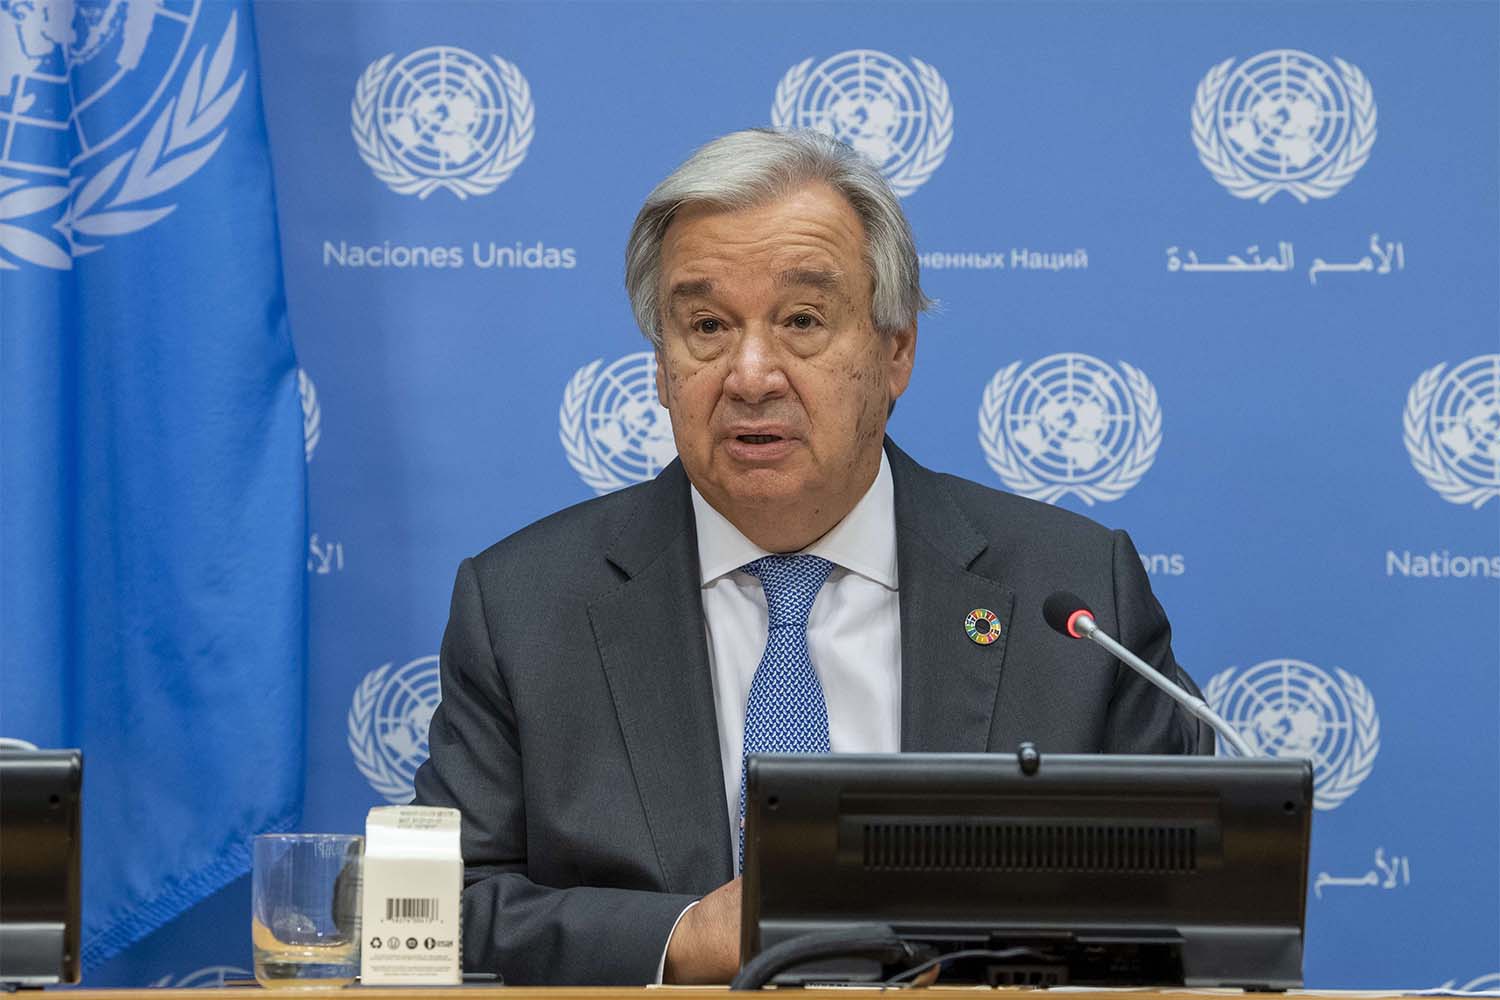 Guterres implored world powers to support peace efforts “not only in words but in actions"